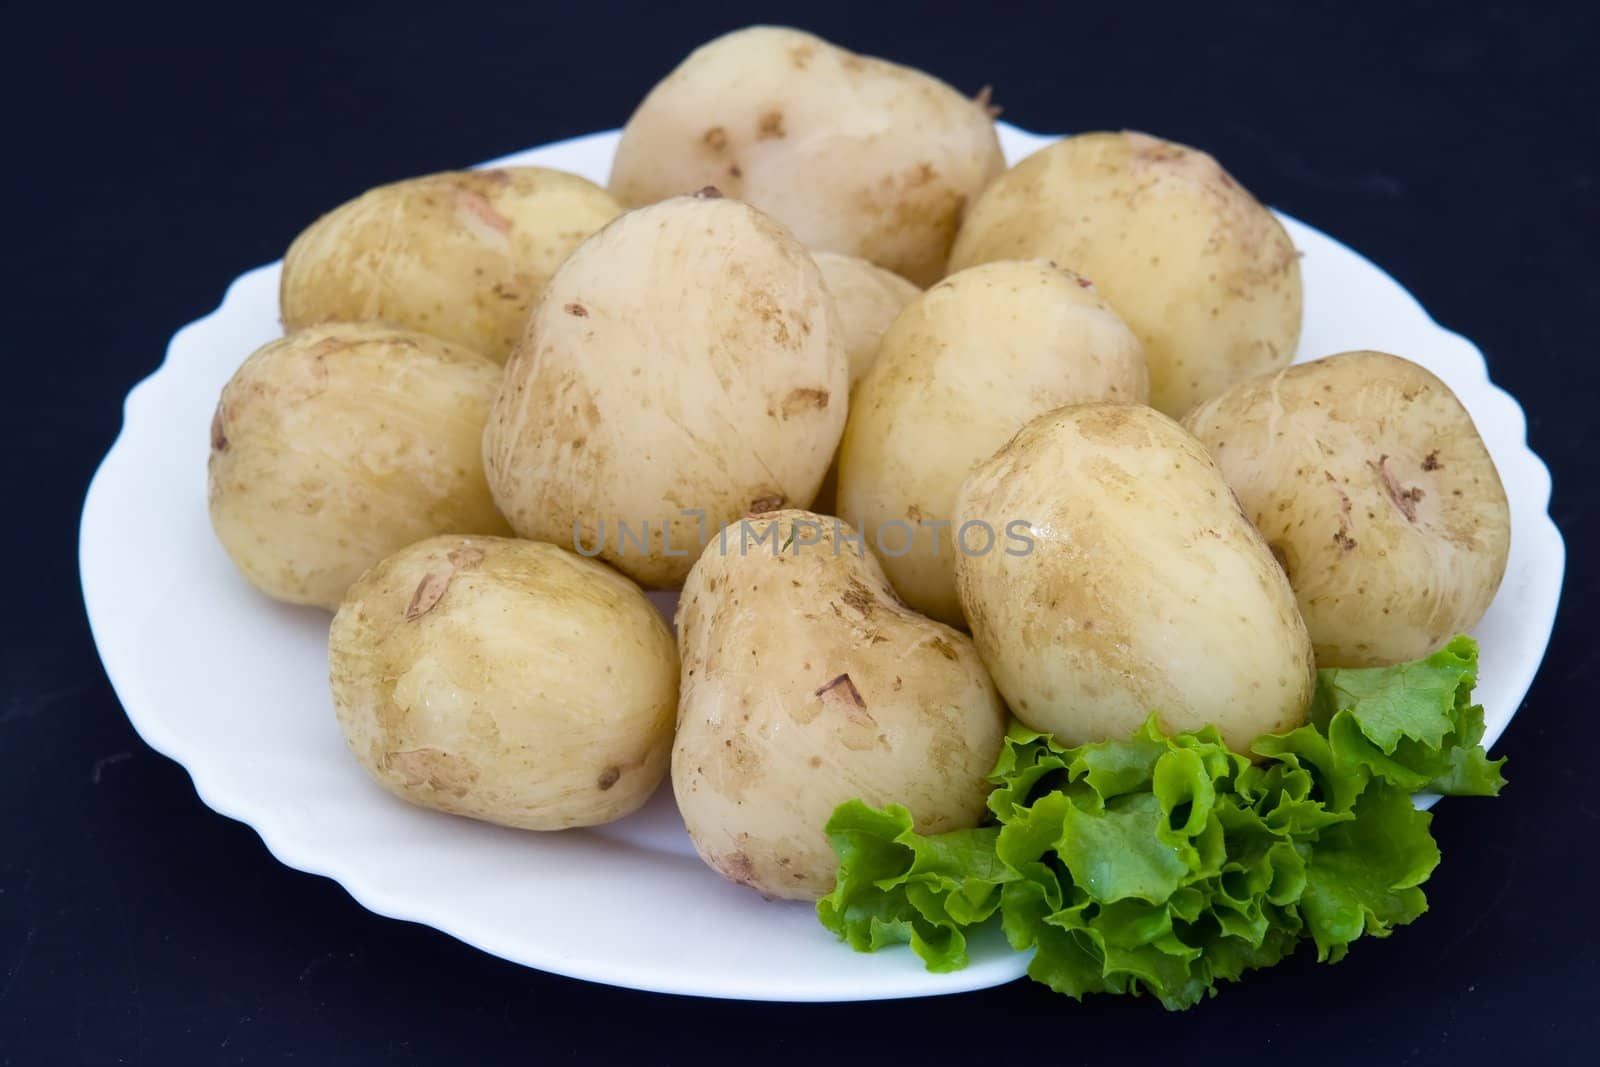 Potatoes on a white plate on a black background